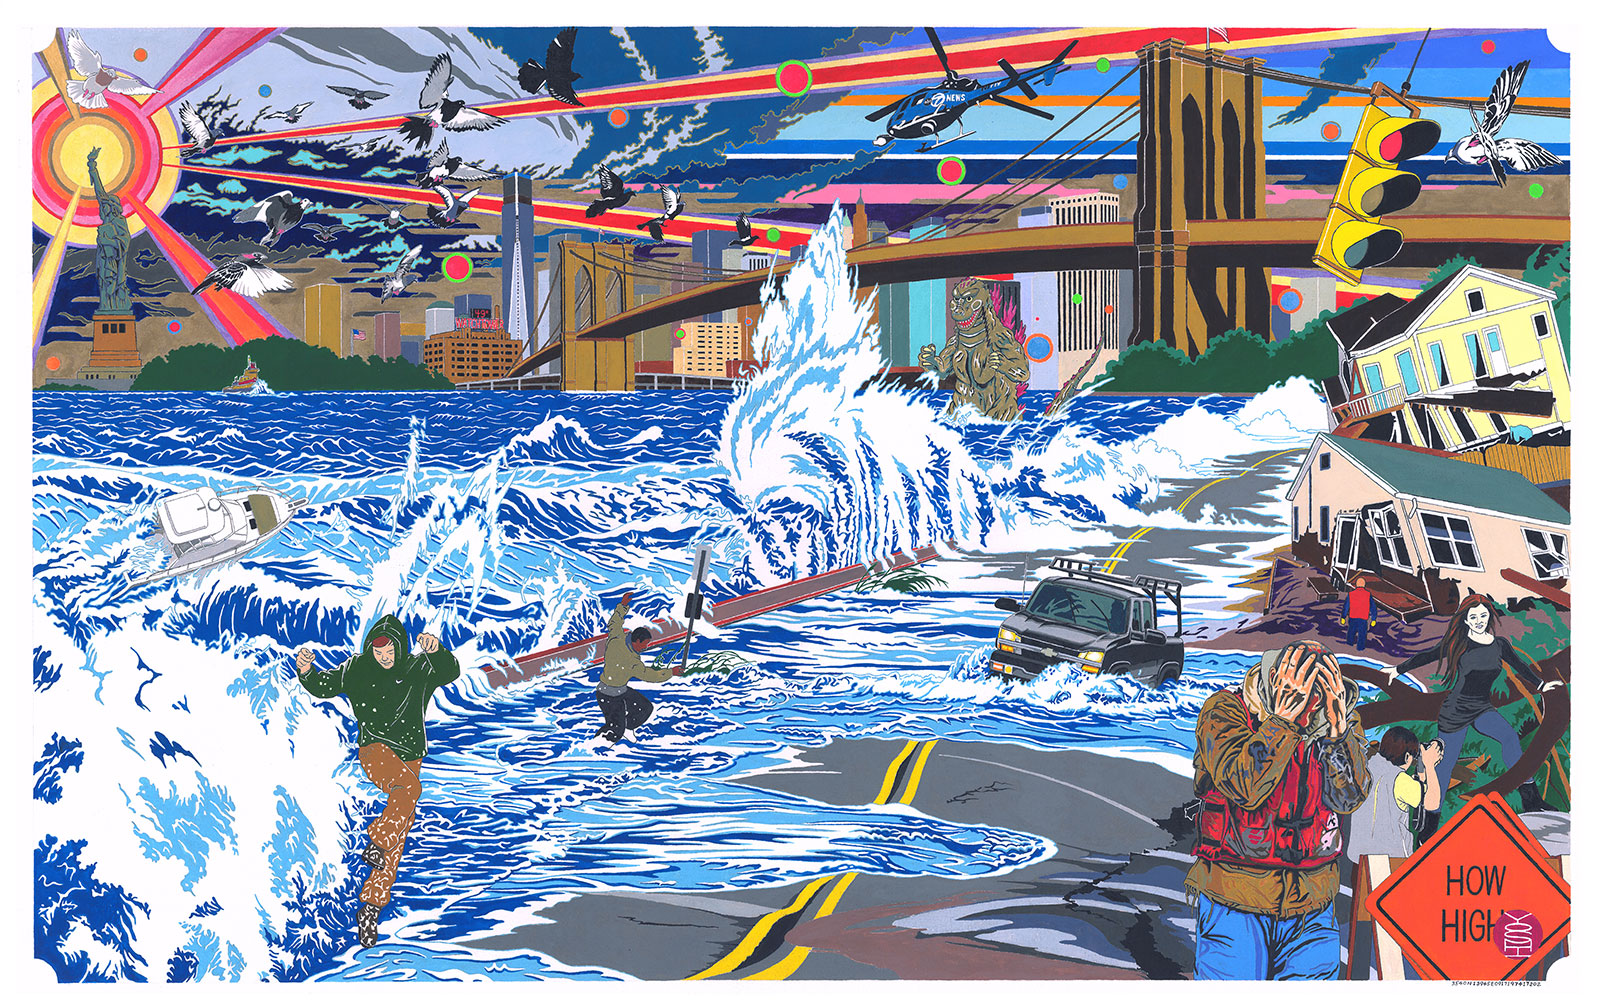 bright gouache painting depicting a flooding sea below the Brooklyn Bridge with the New York City skyline and Godzilla in the background.